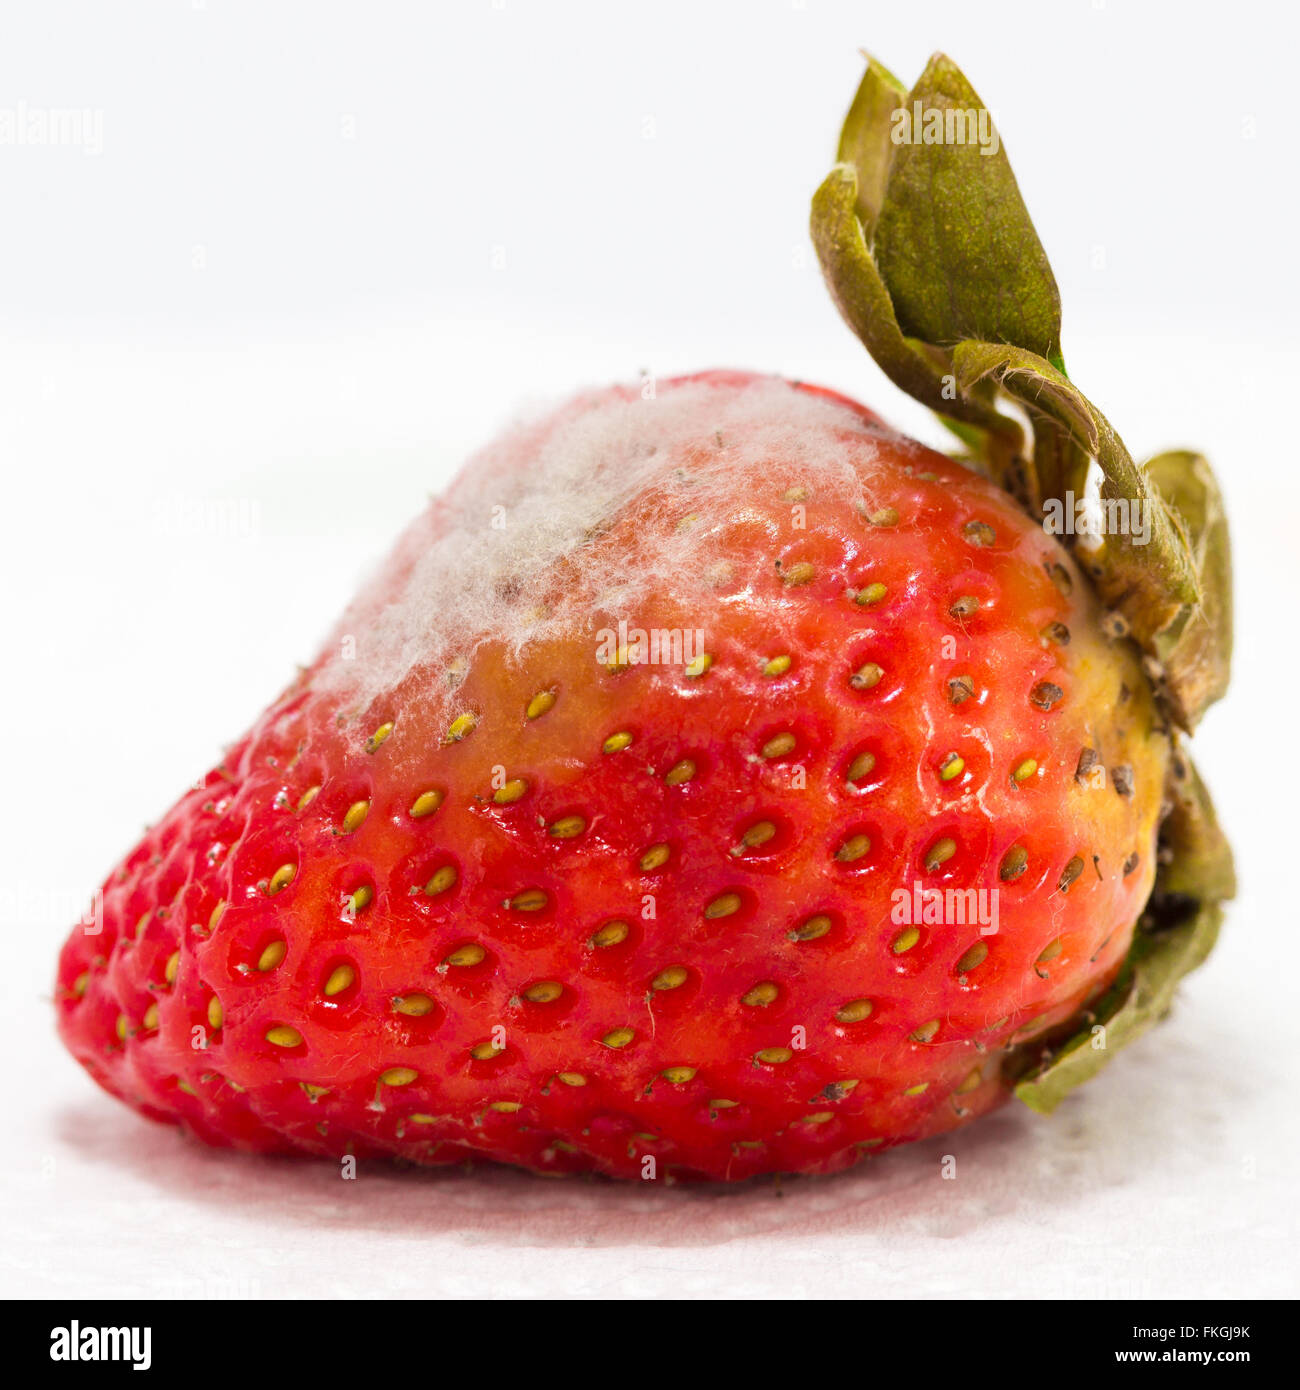 Strawberry covered with mould, composite image - Stock Image